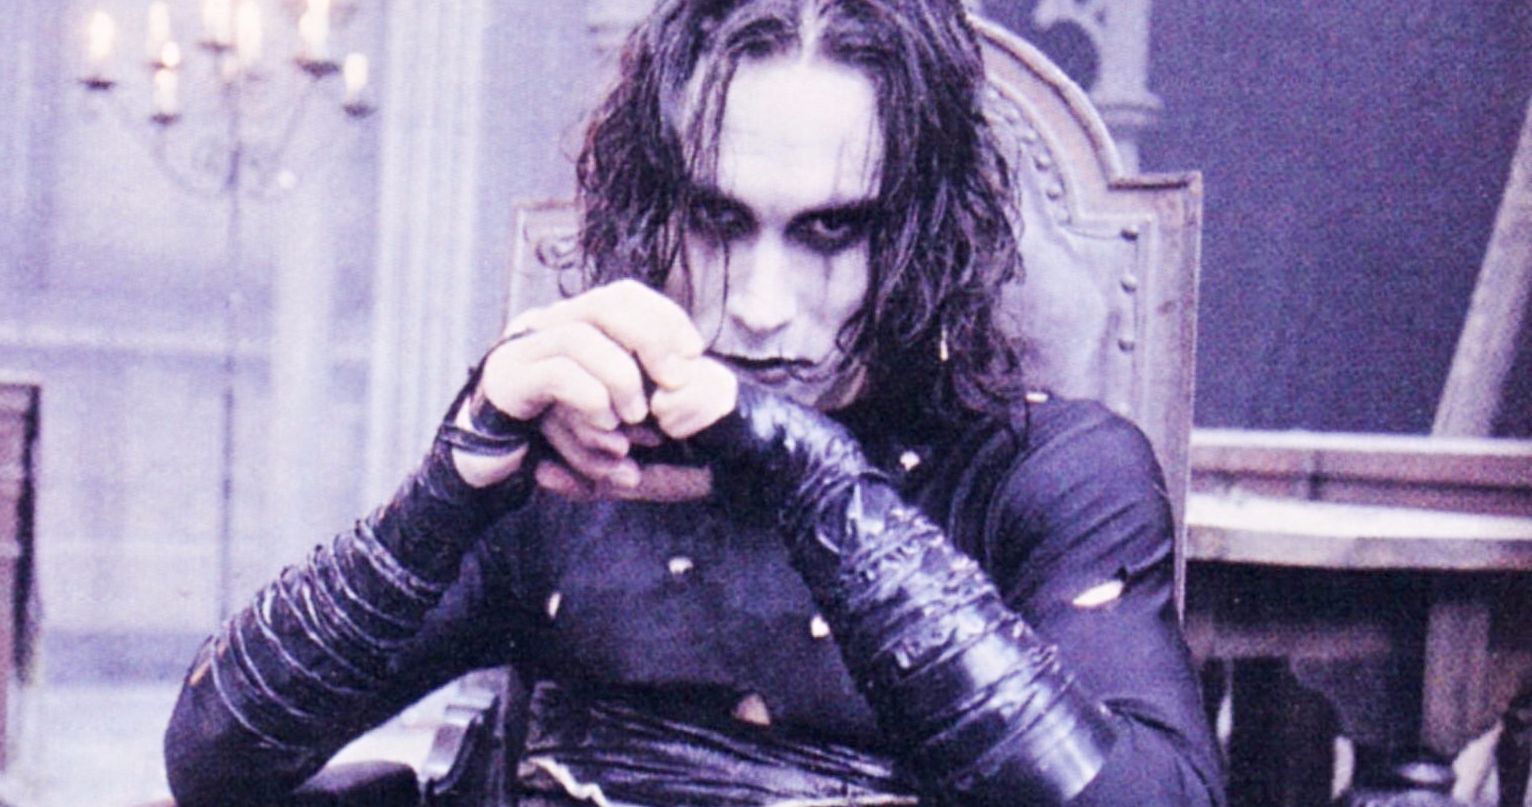 Brandon Lee's Family Remembers The Crow Star on the Anniversary of His Death